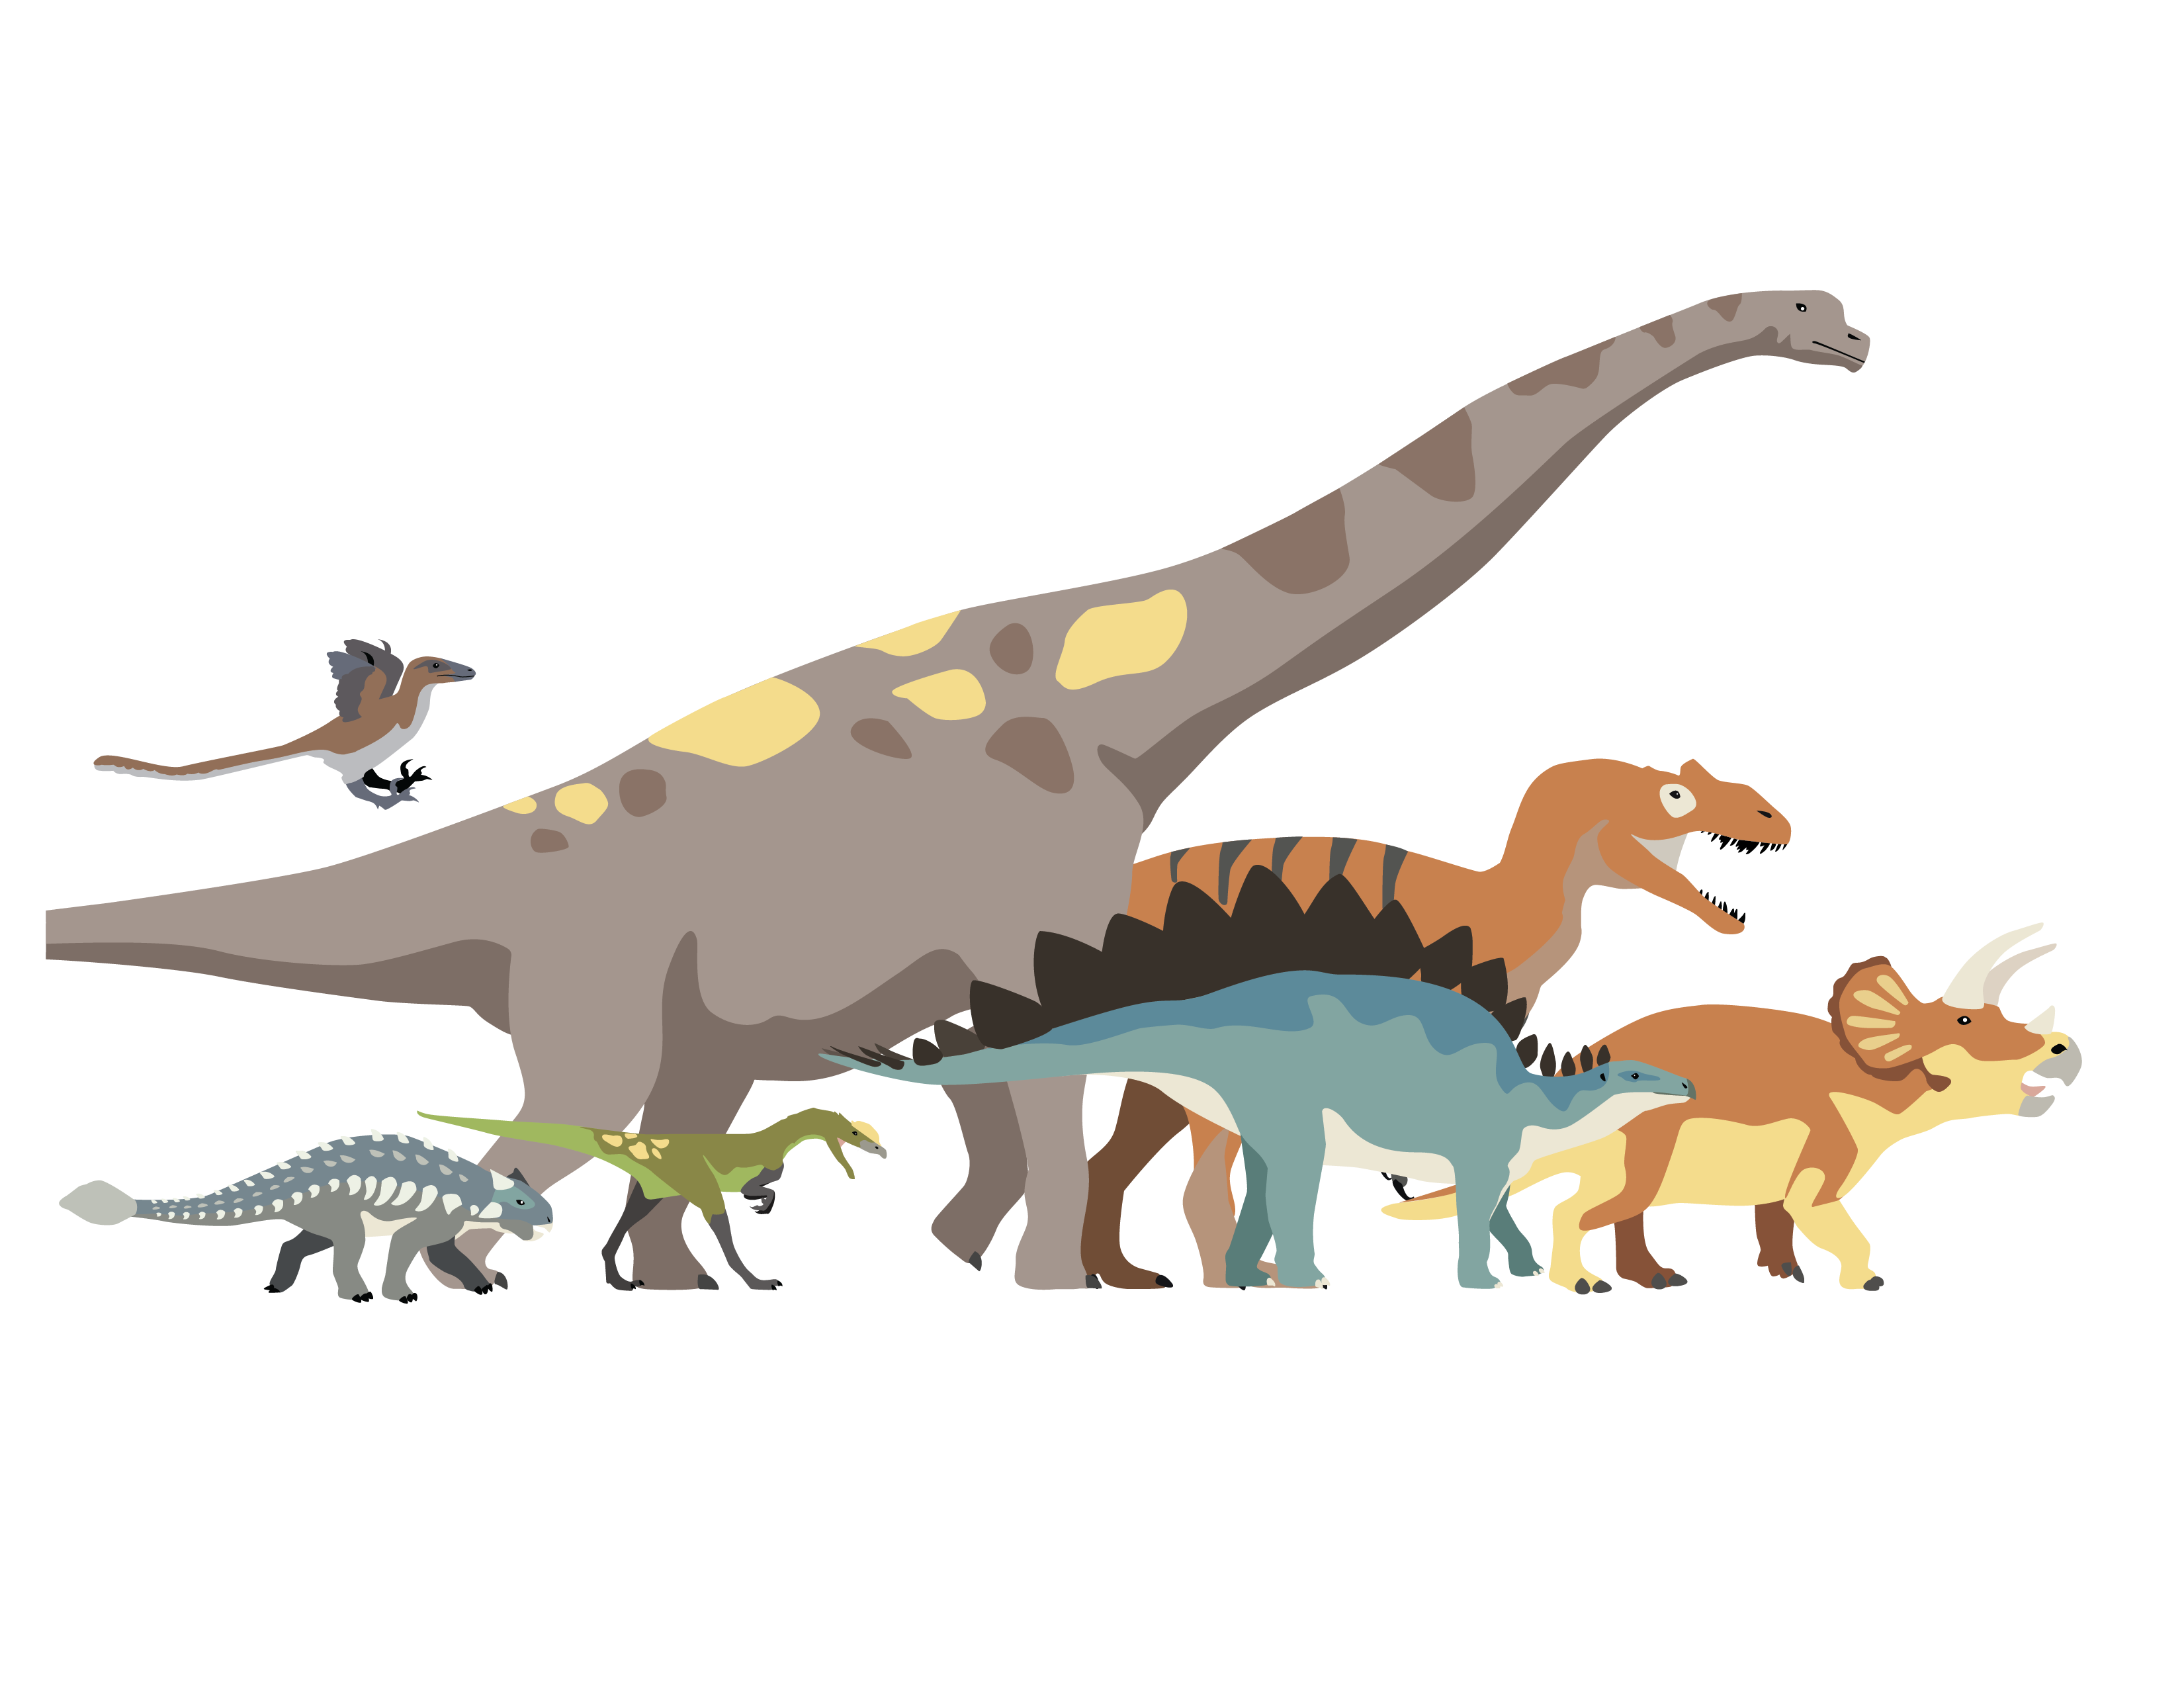 Drawing of a group of dinosaurs in various sizes. 